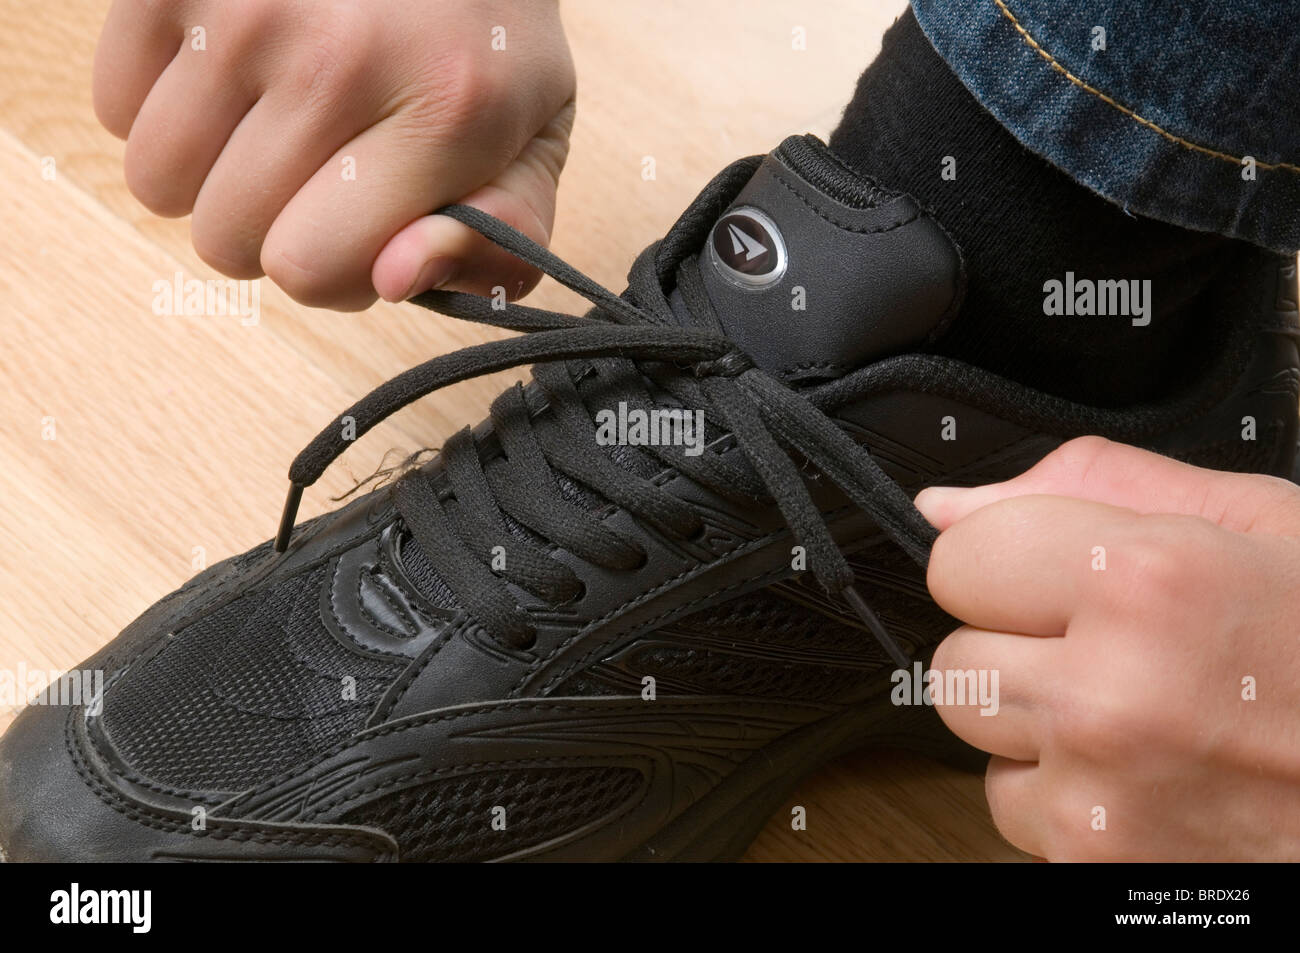 tightening shoe laces